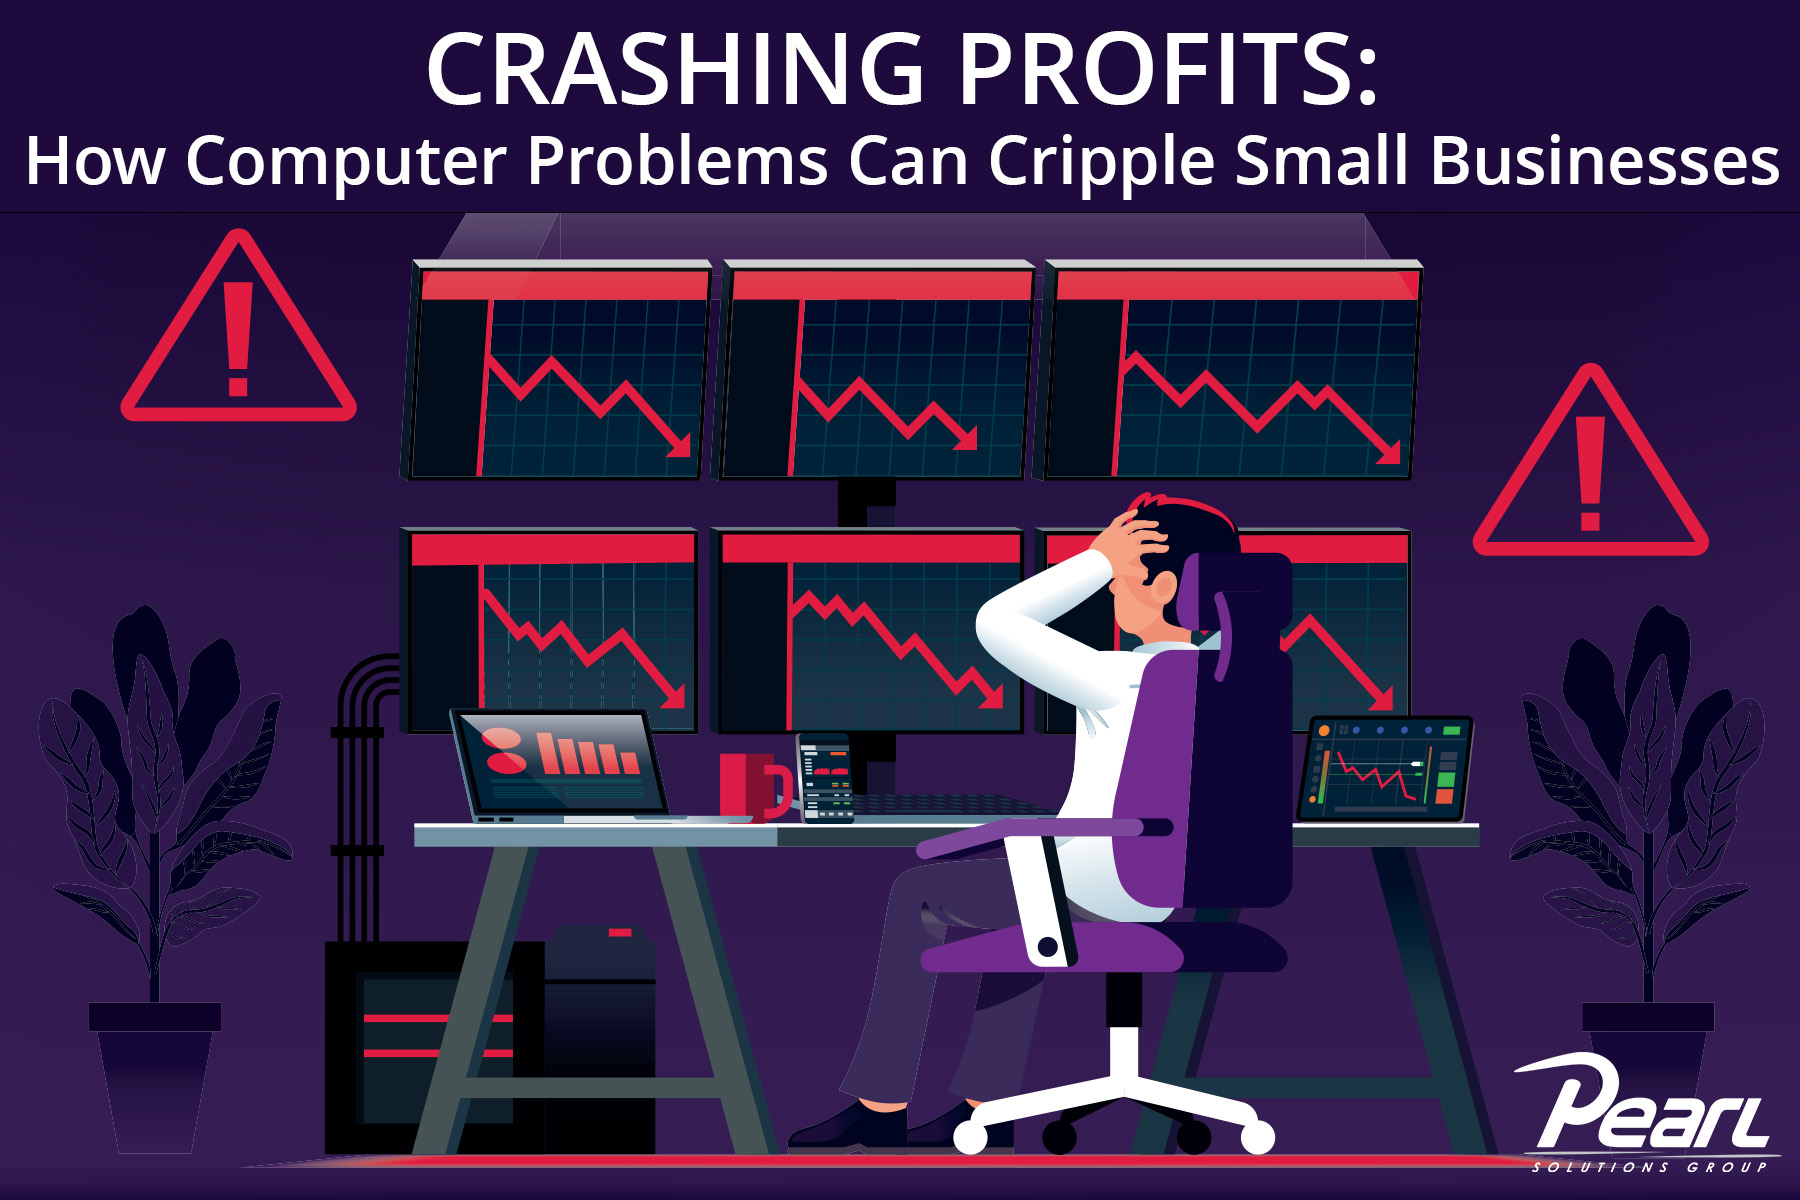 How Computer Problems Cripple Small Businesses